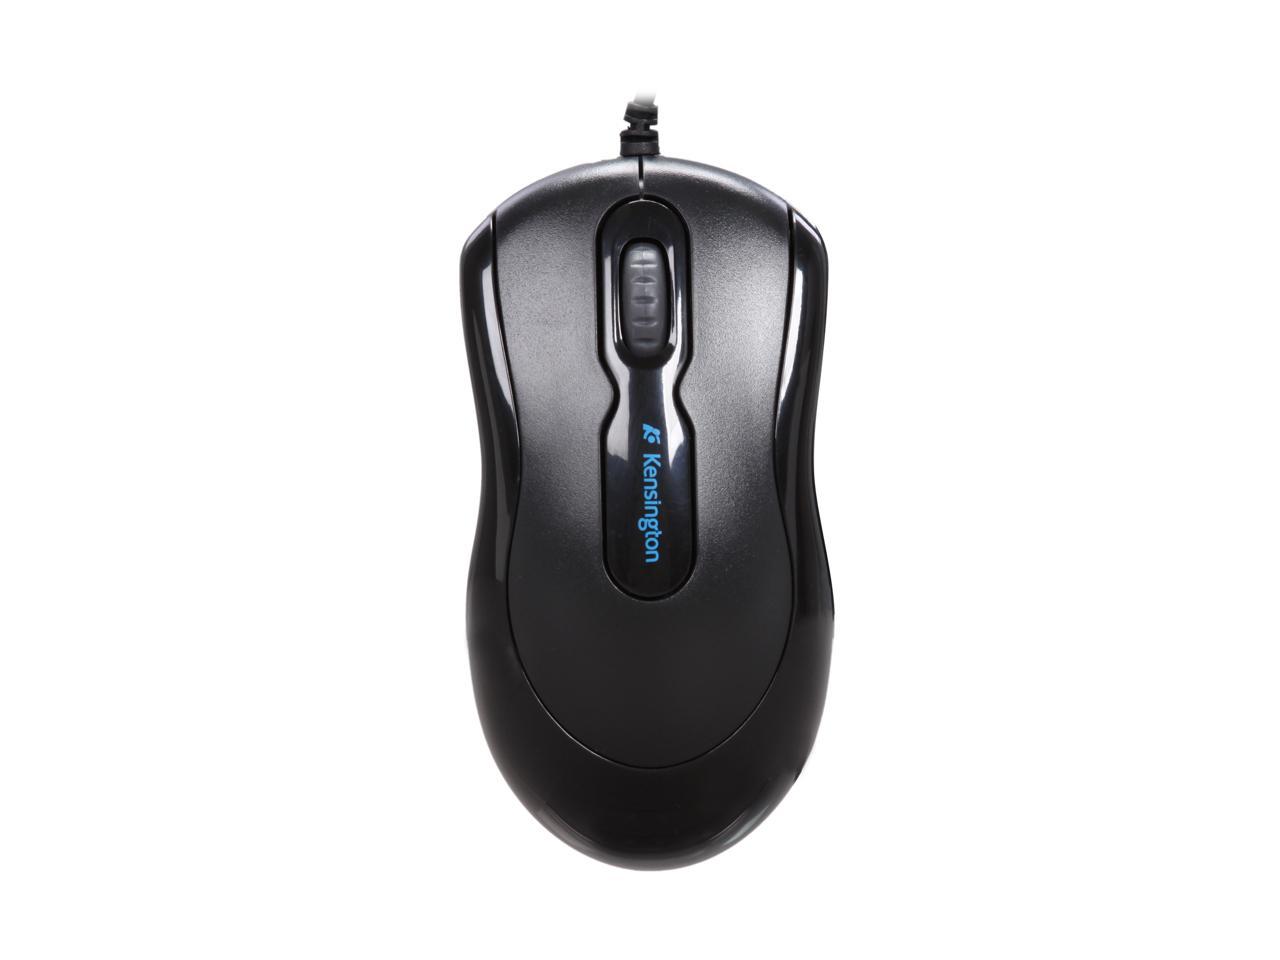 Kensington K72356US Black 3 Buttons 1 x Wheel USB Wired Optical Mouse